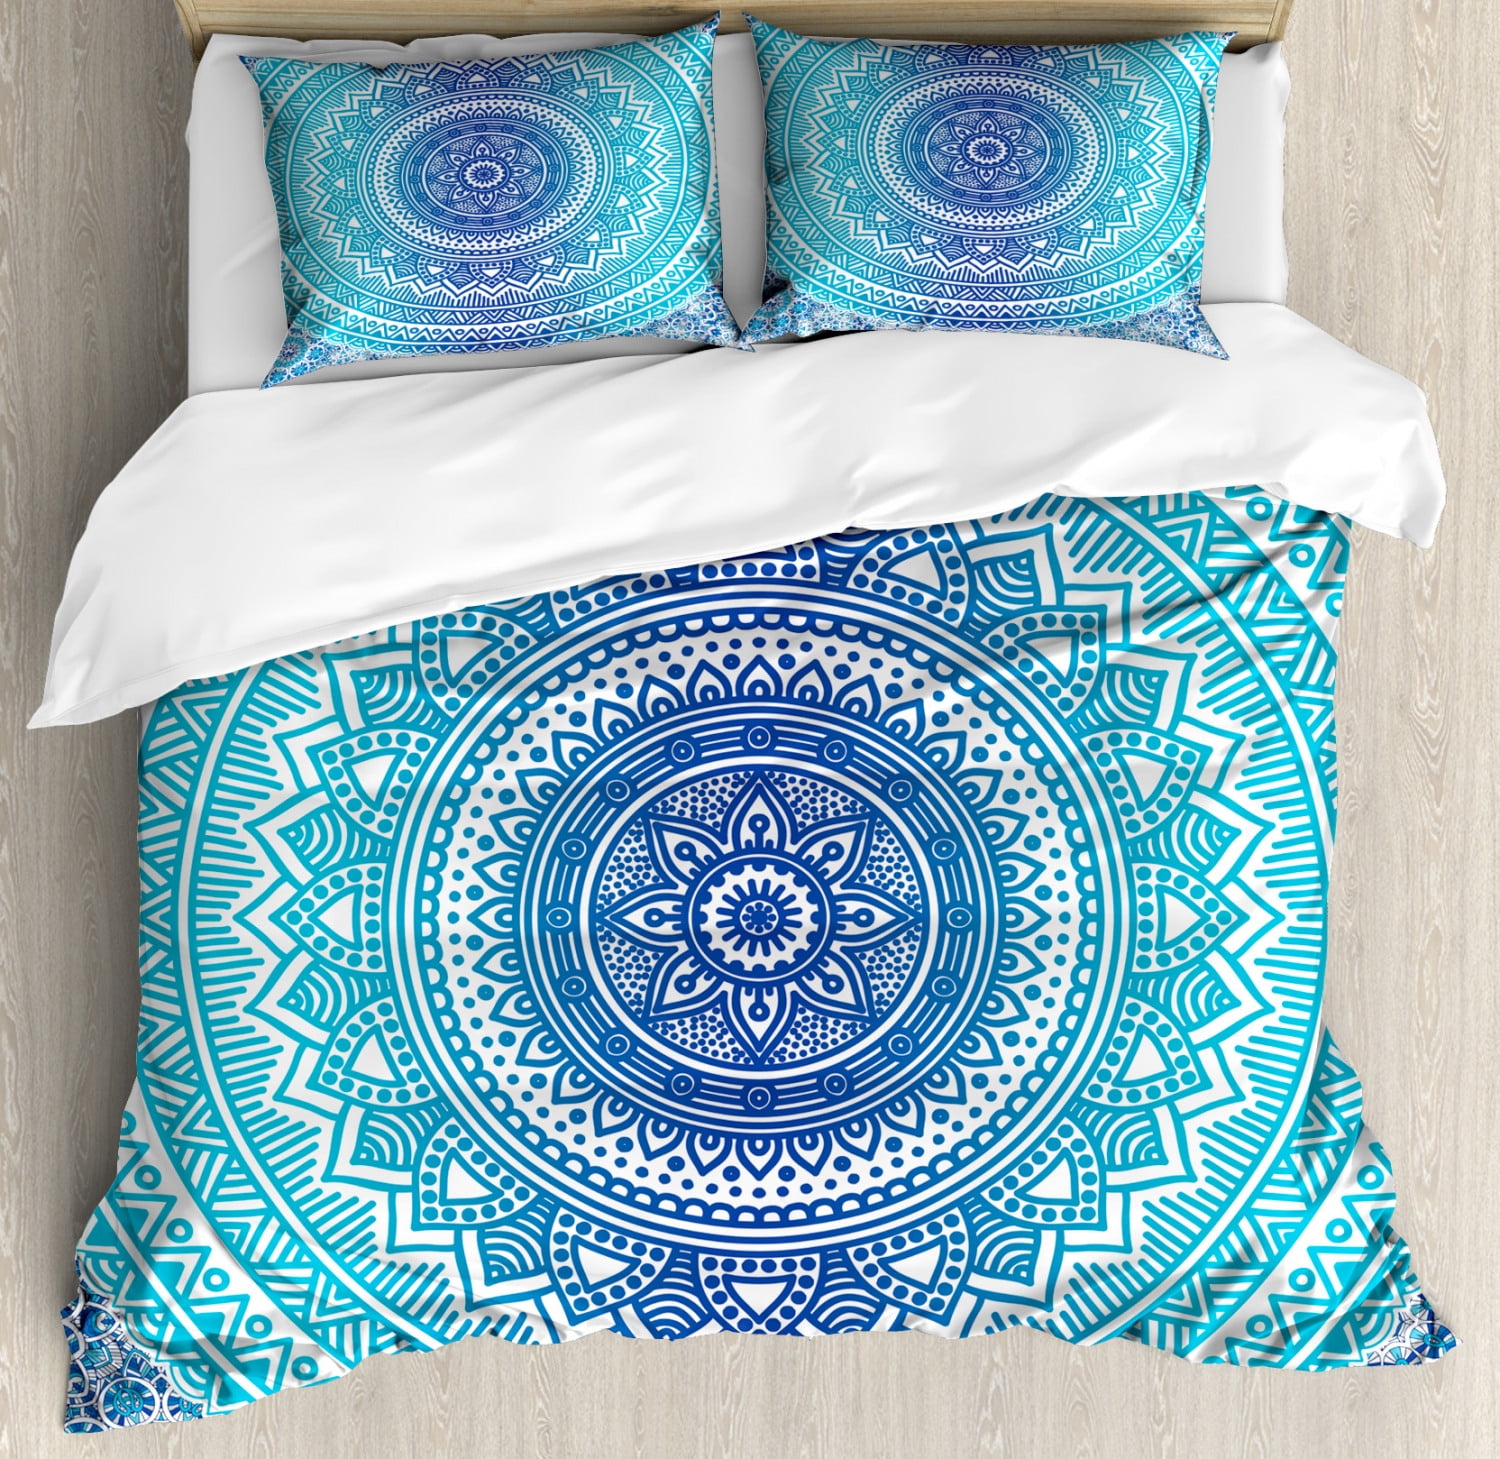 Blue And Pink King Size Duvet Cover Set, Bohemian Style King Size Bedding Set